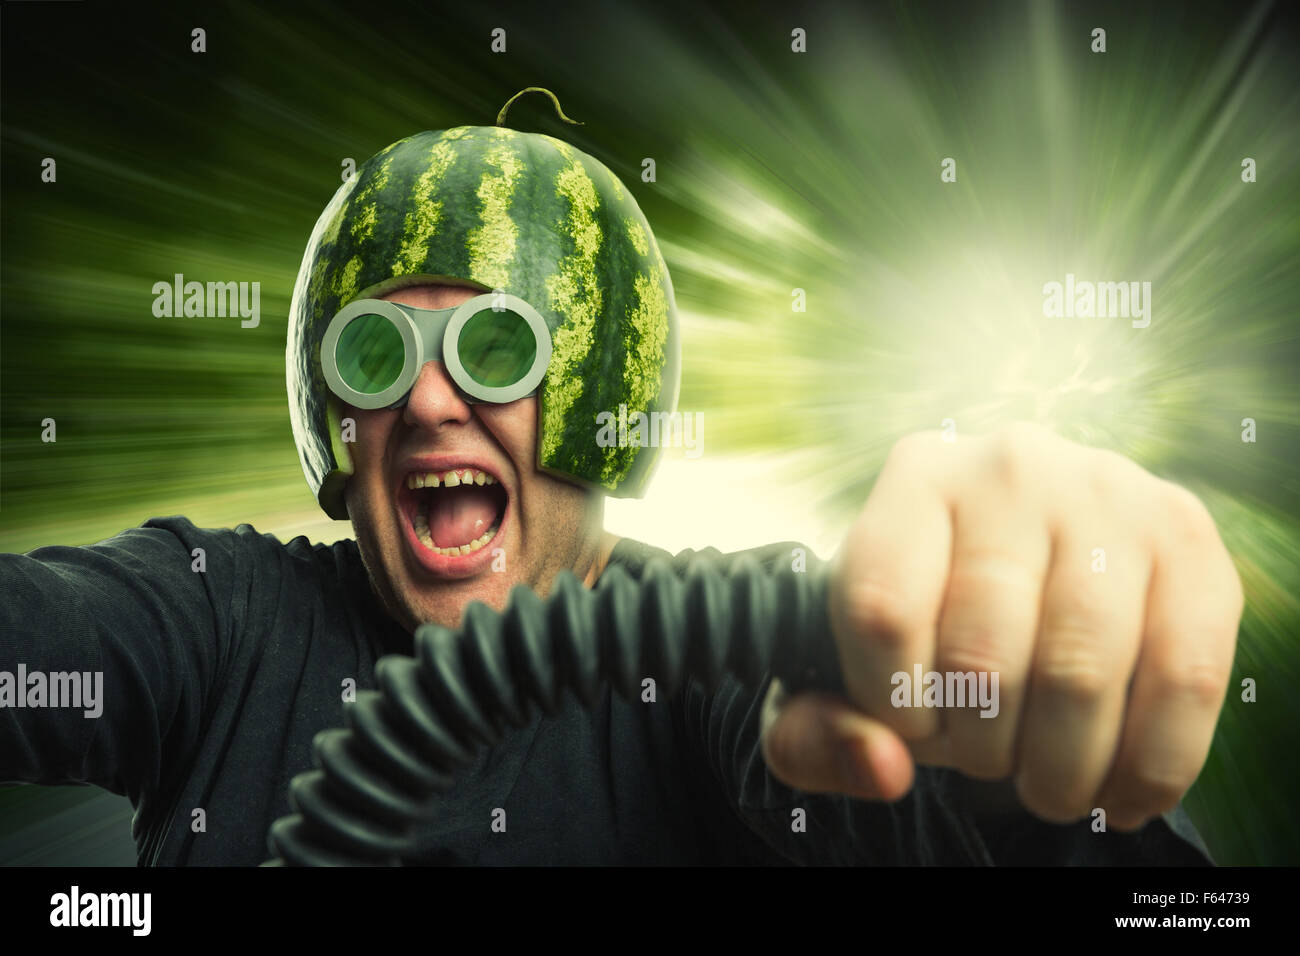 Bizarre man in a helmet from a watermelon riding fast Stock Photo